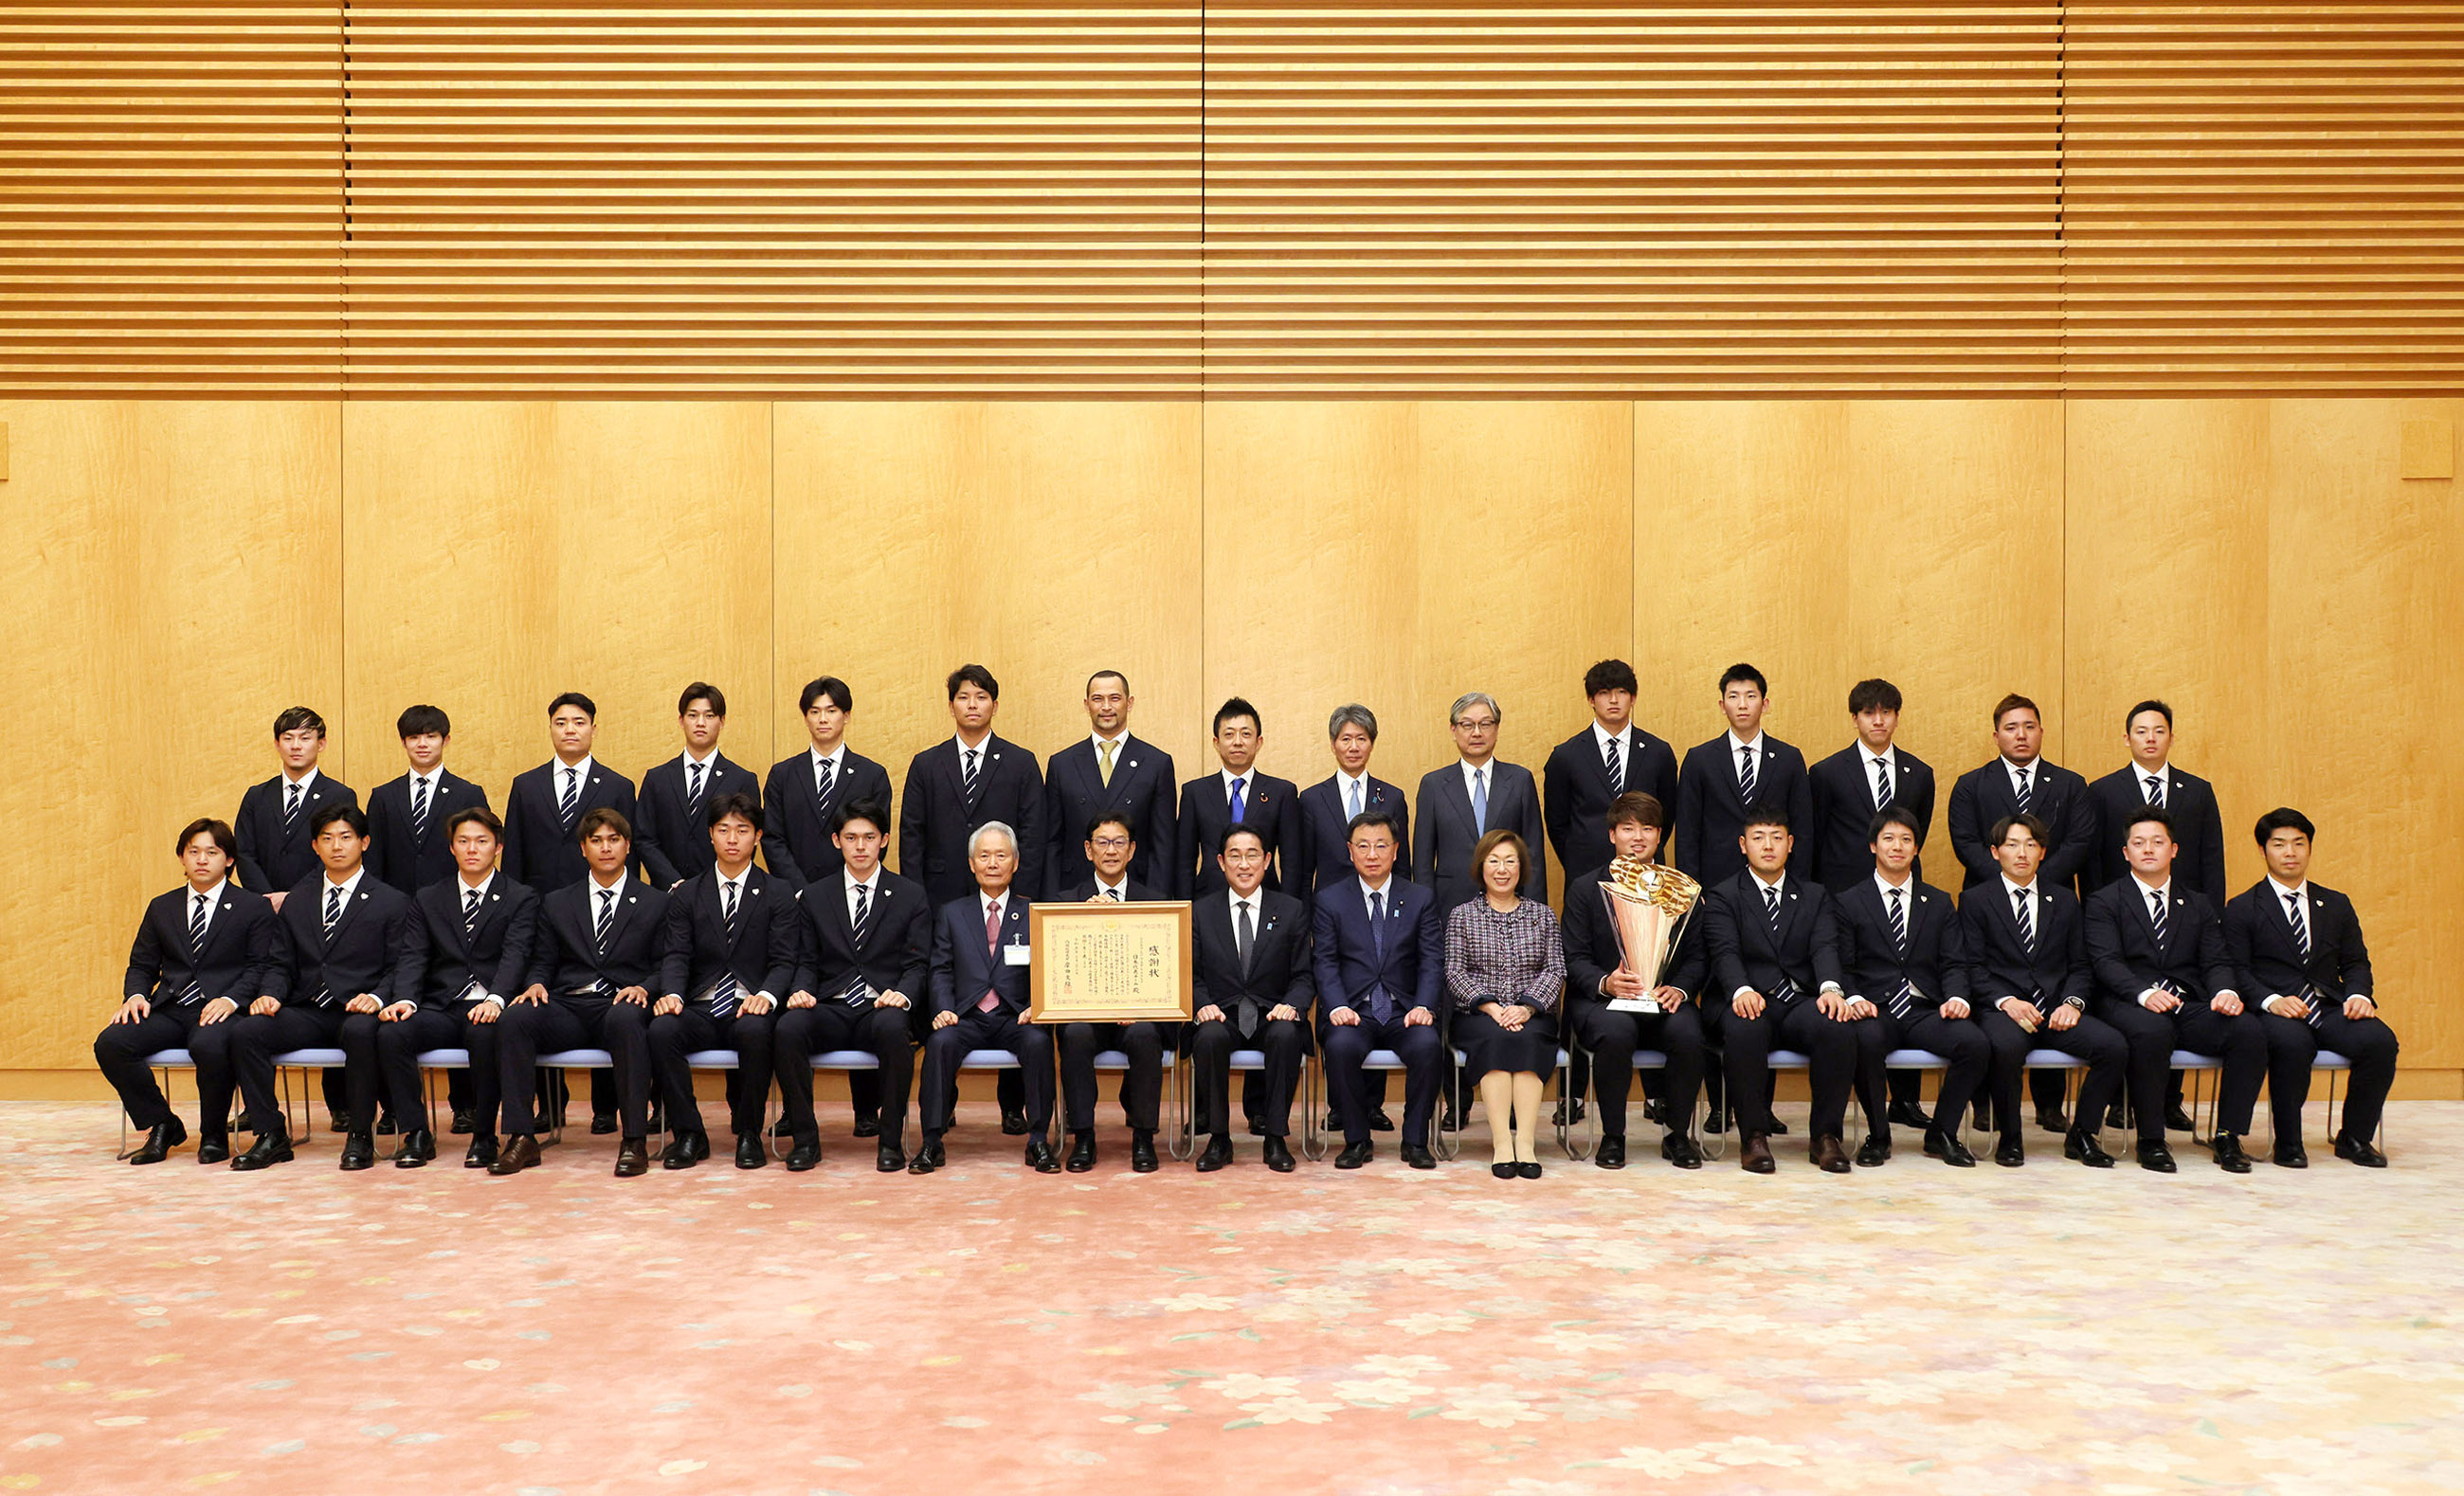 Courtesy Call from the Team Japan in the 2023 World Baseball Classic